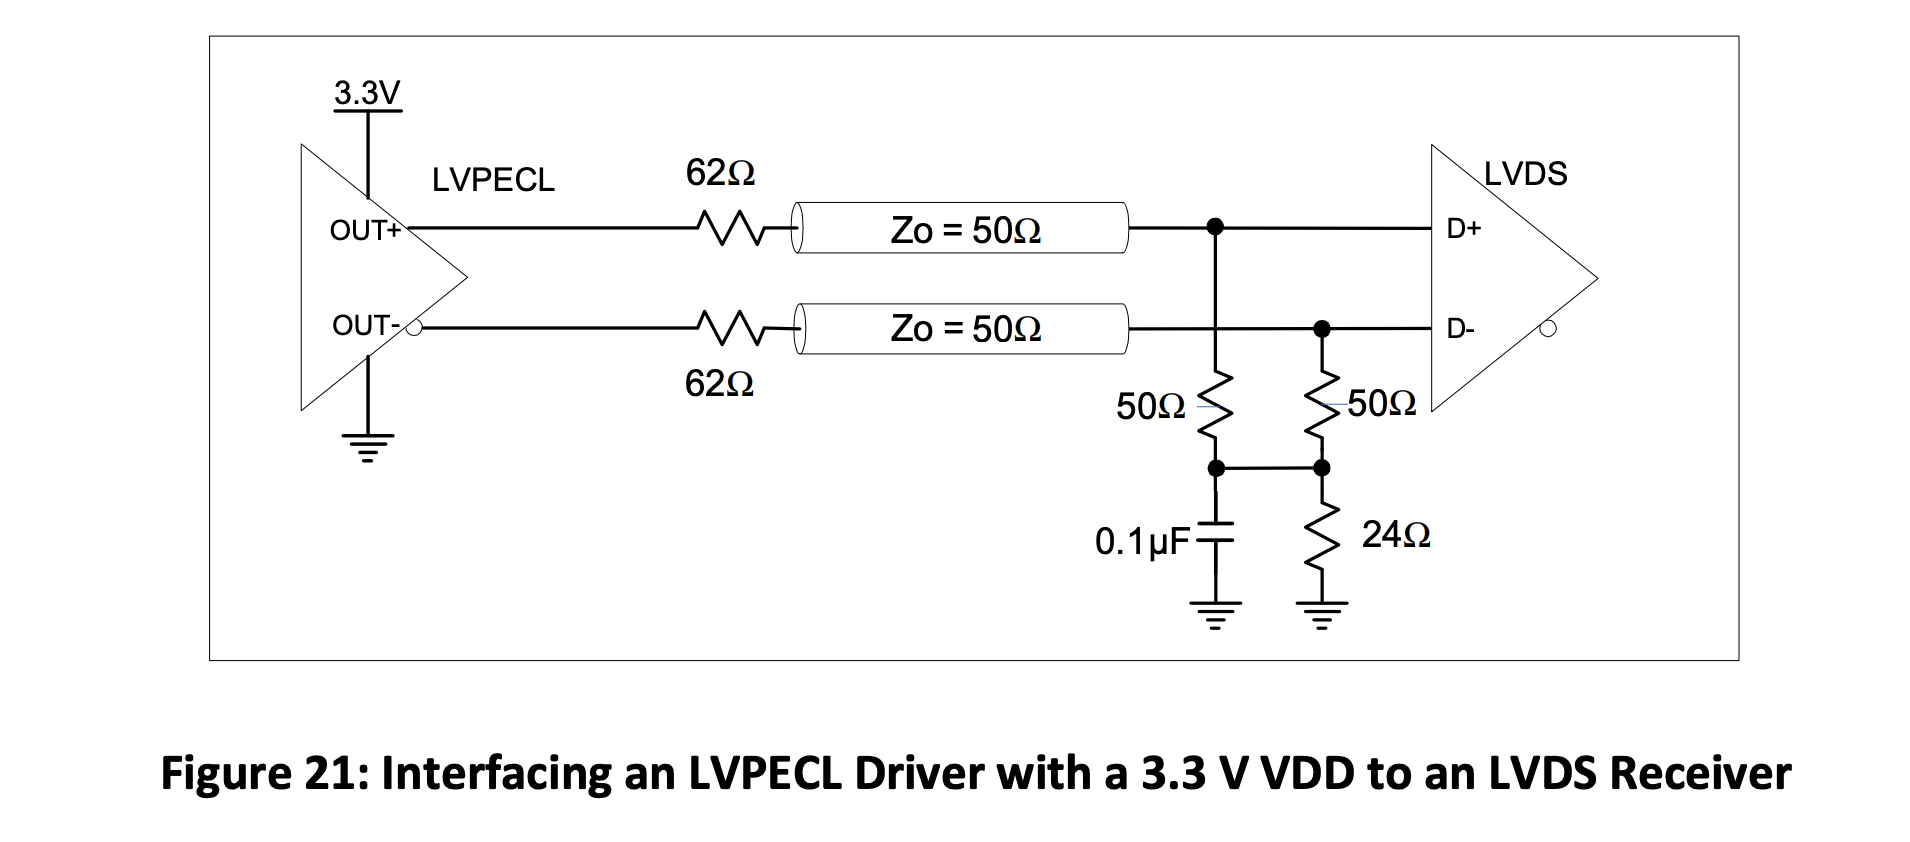 Figure 21 Interacing an LVPECL Driver with a 3.3 V VDD to an LVDS Receiver